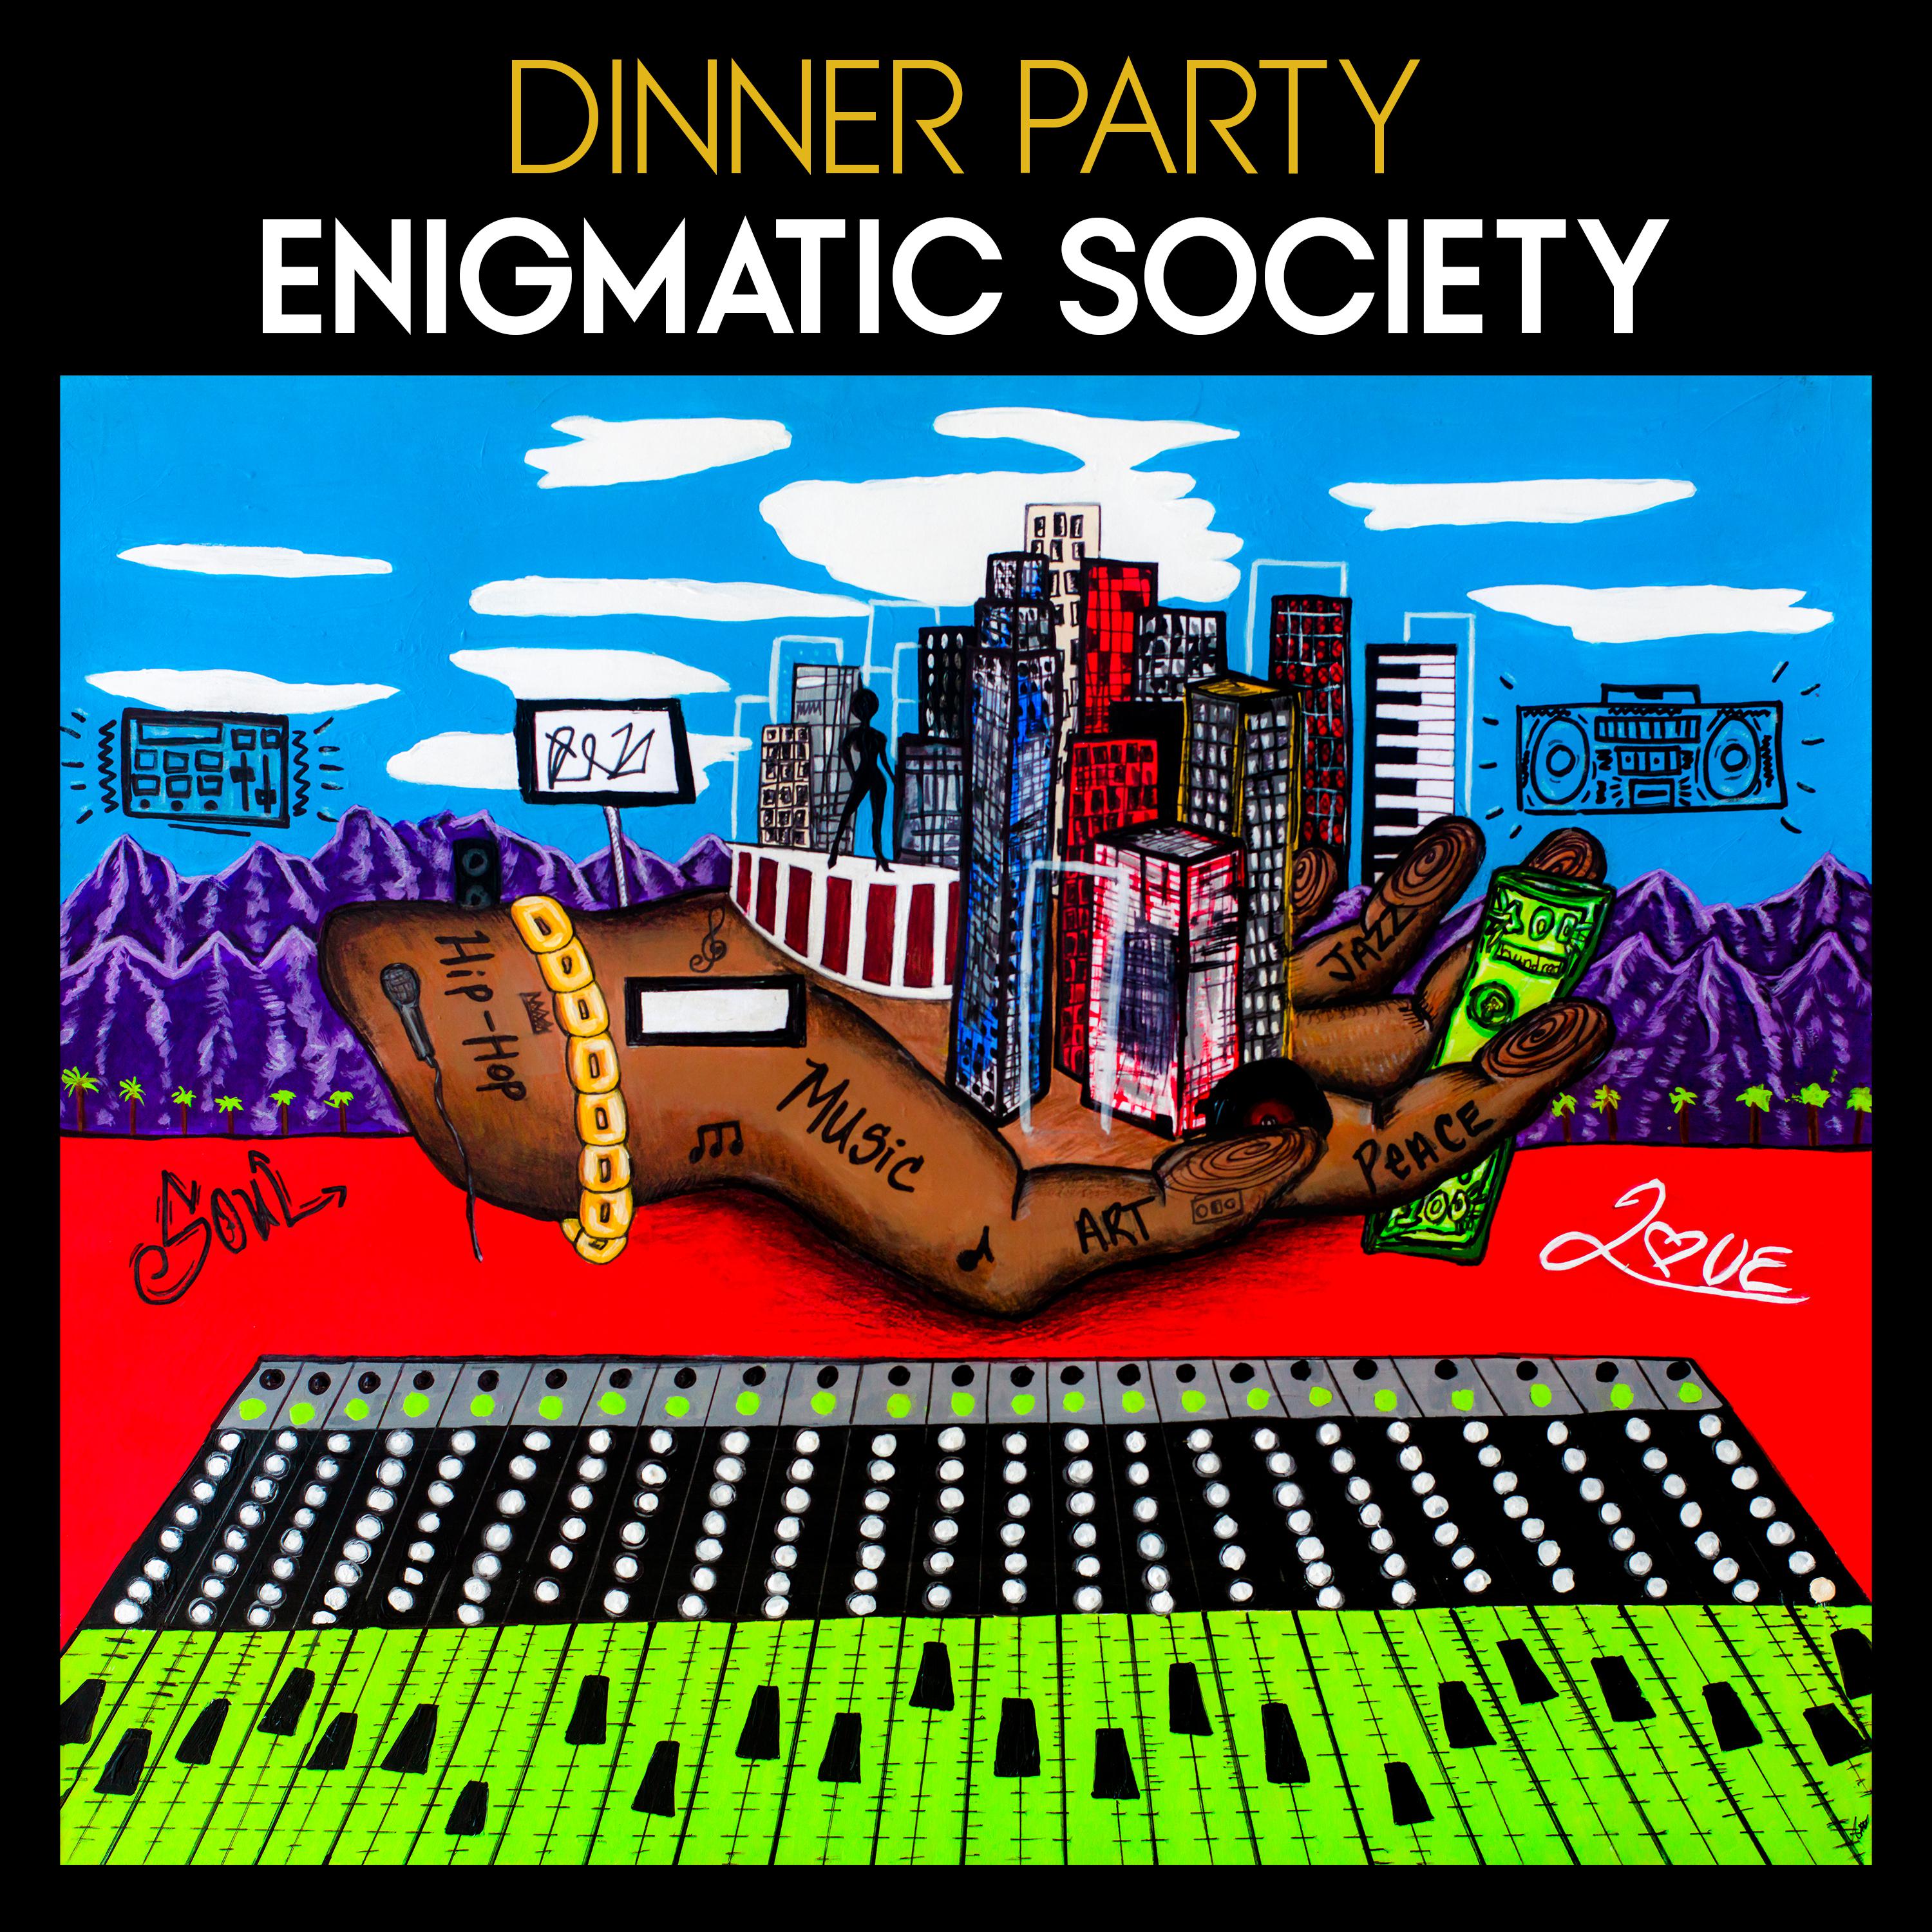 Dinner Party - The Lower East Side